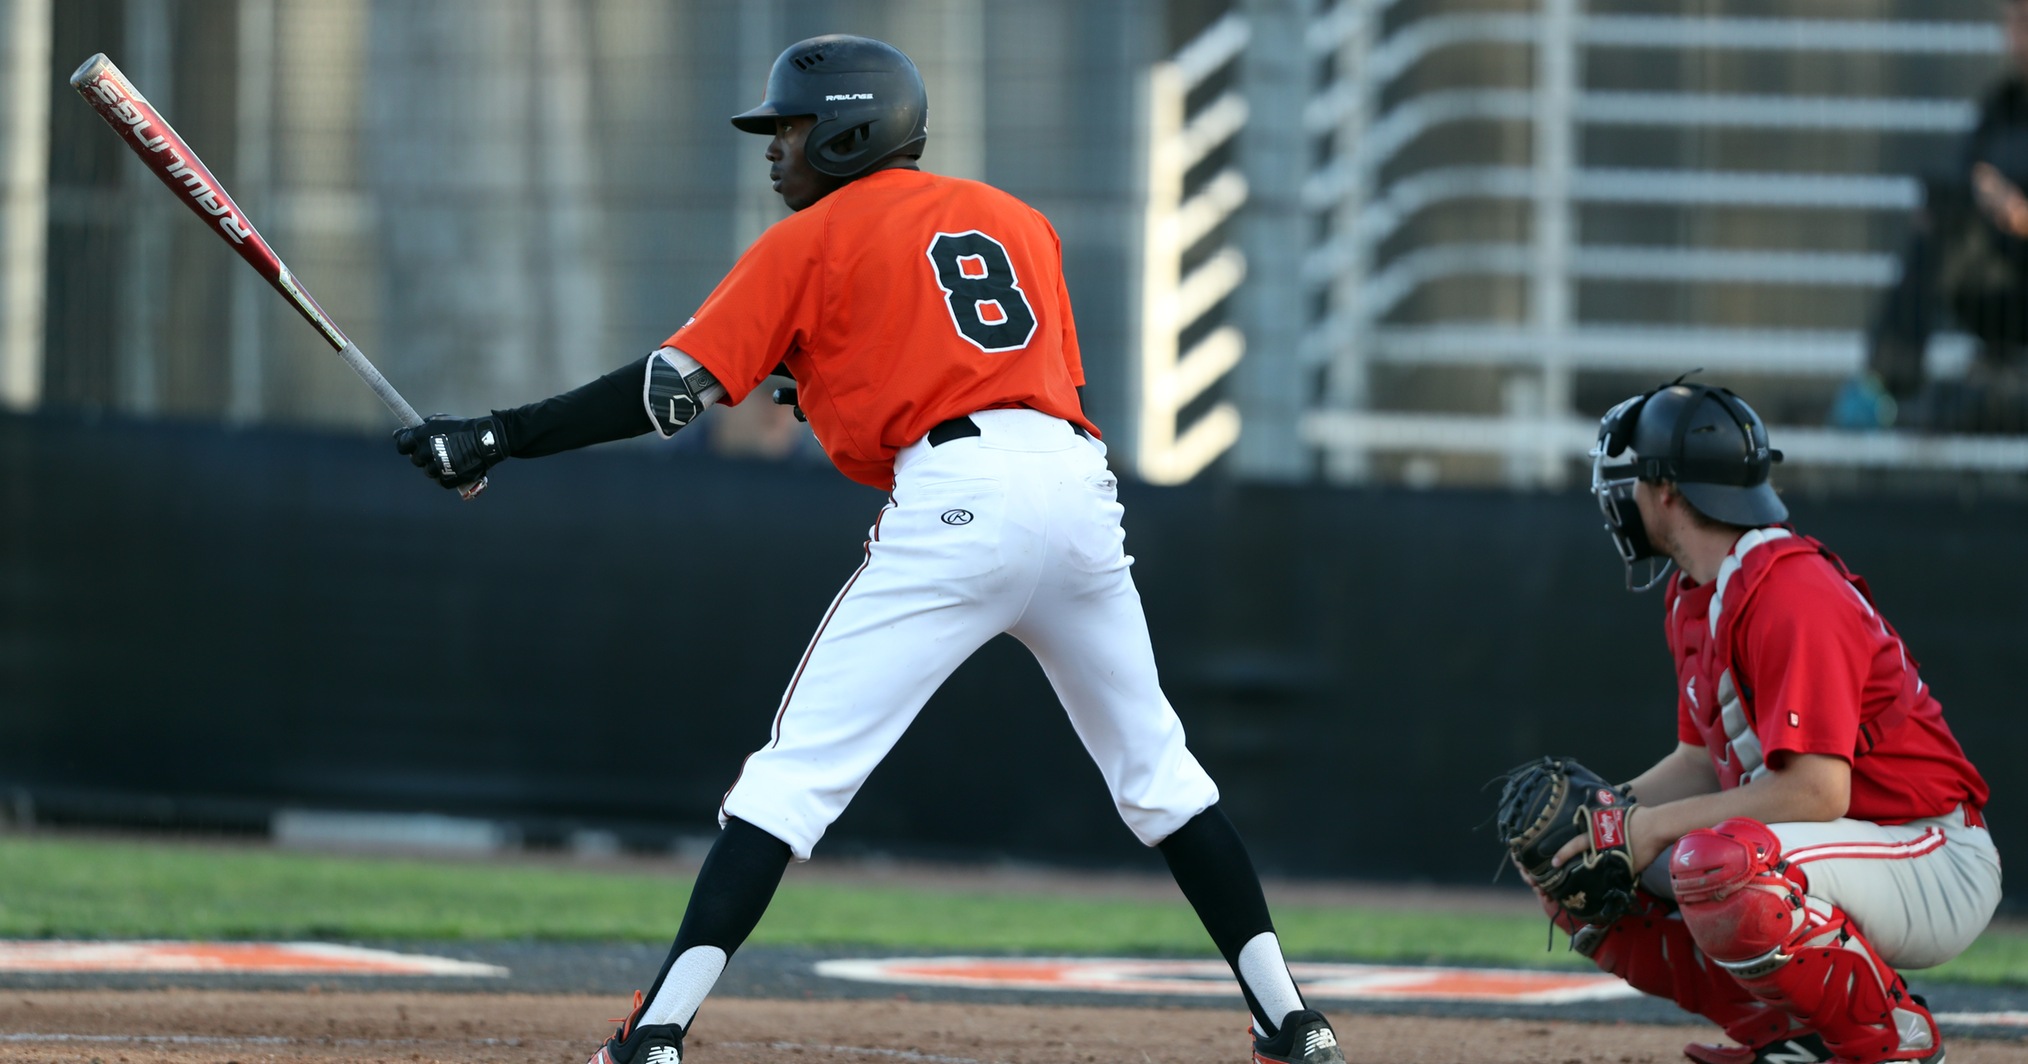 Junior Coleman recorded a three-RBI triple in the top of the second inning and swiped his 22nd bag of the season in a victory over LA Pierce on Thursday. (Photo by Bobby R. Hester)